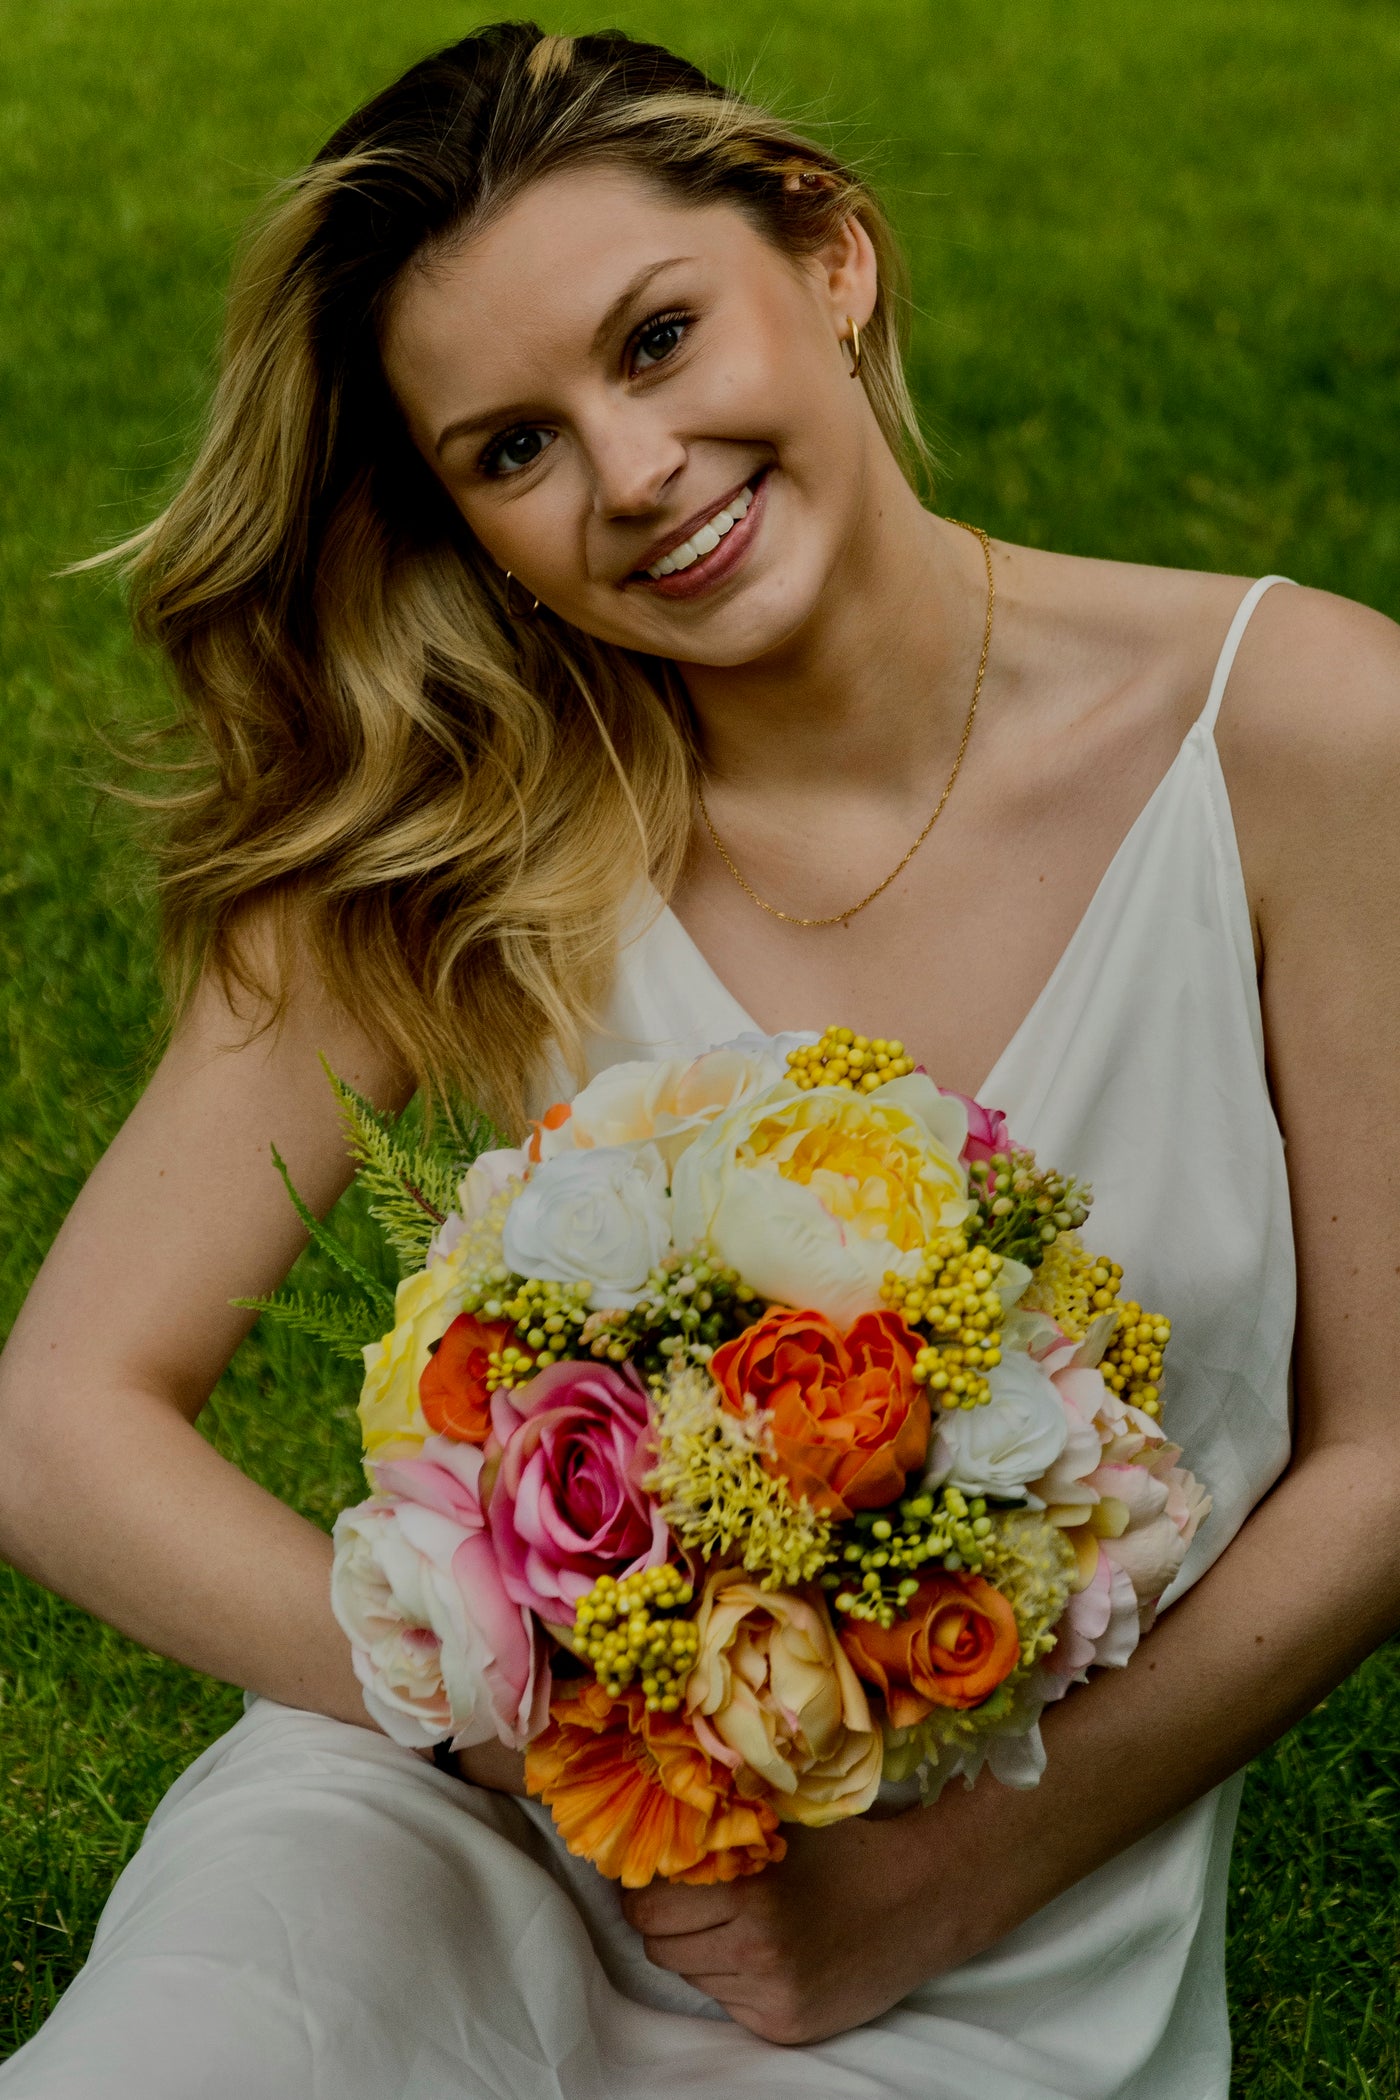 Rent a Rose-Bridal Bouquet- Yellow, orange and pink flowers.Rent for five days for $88.00